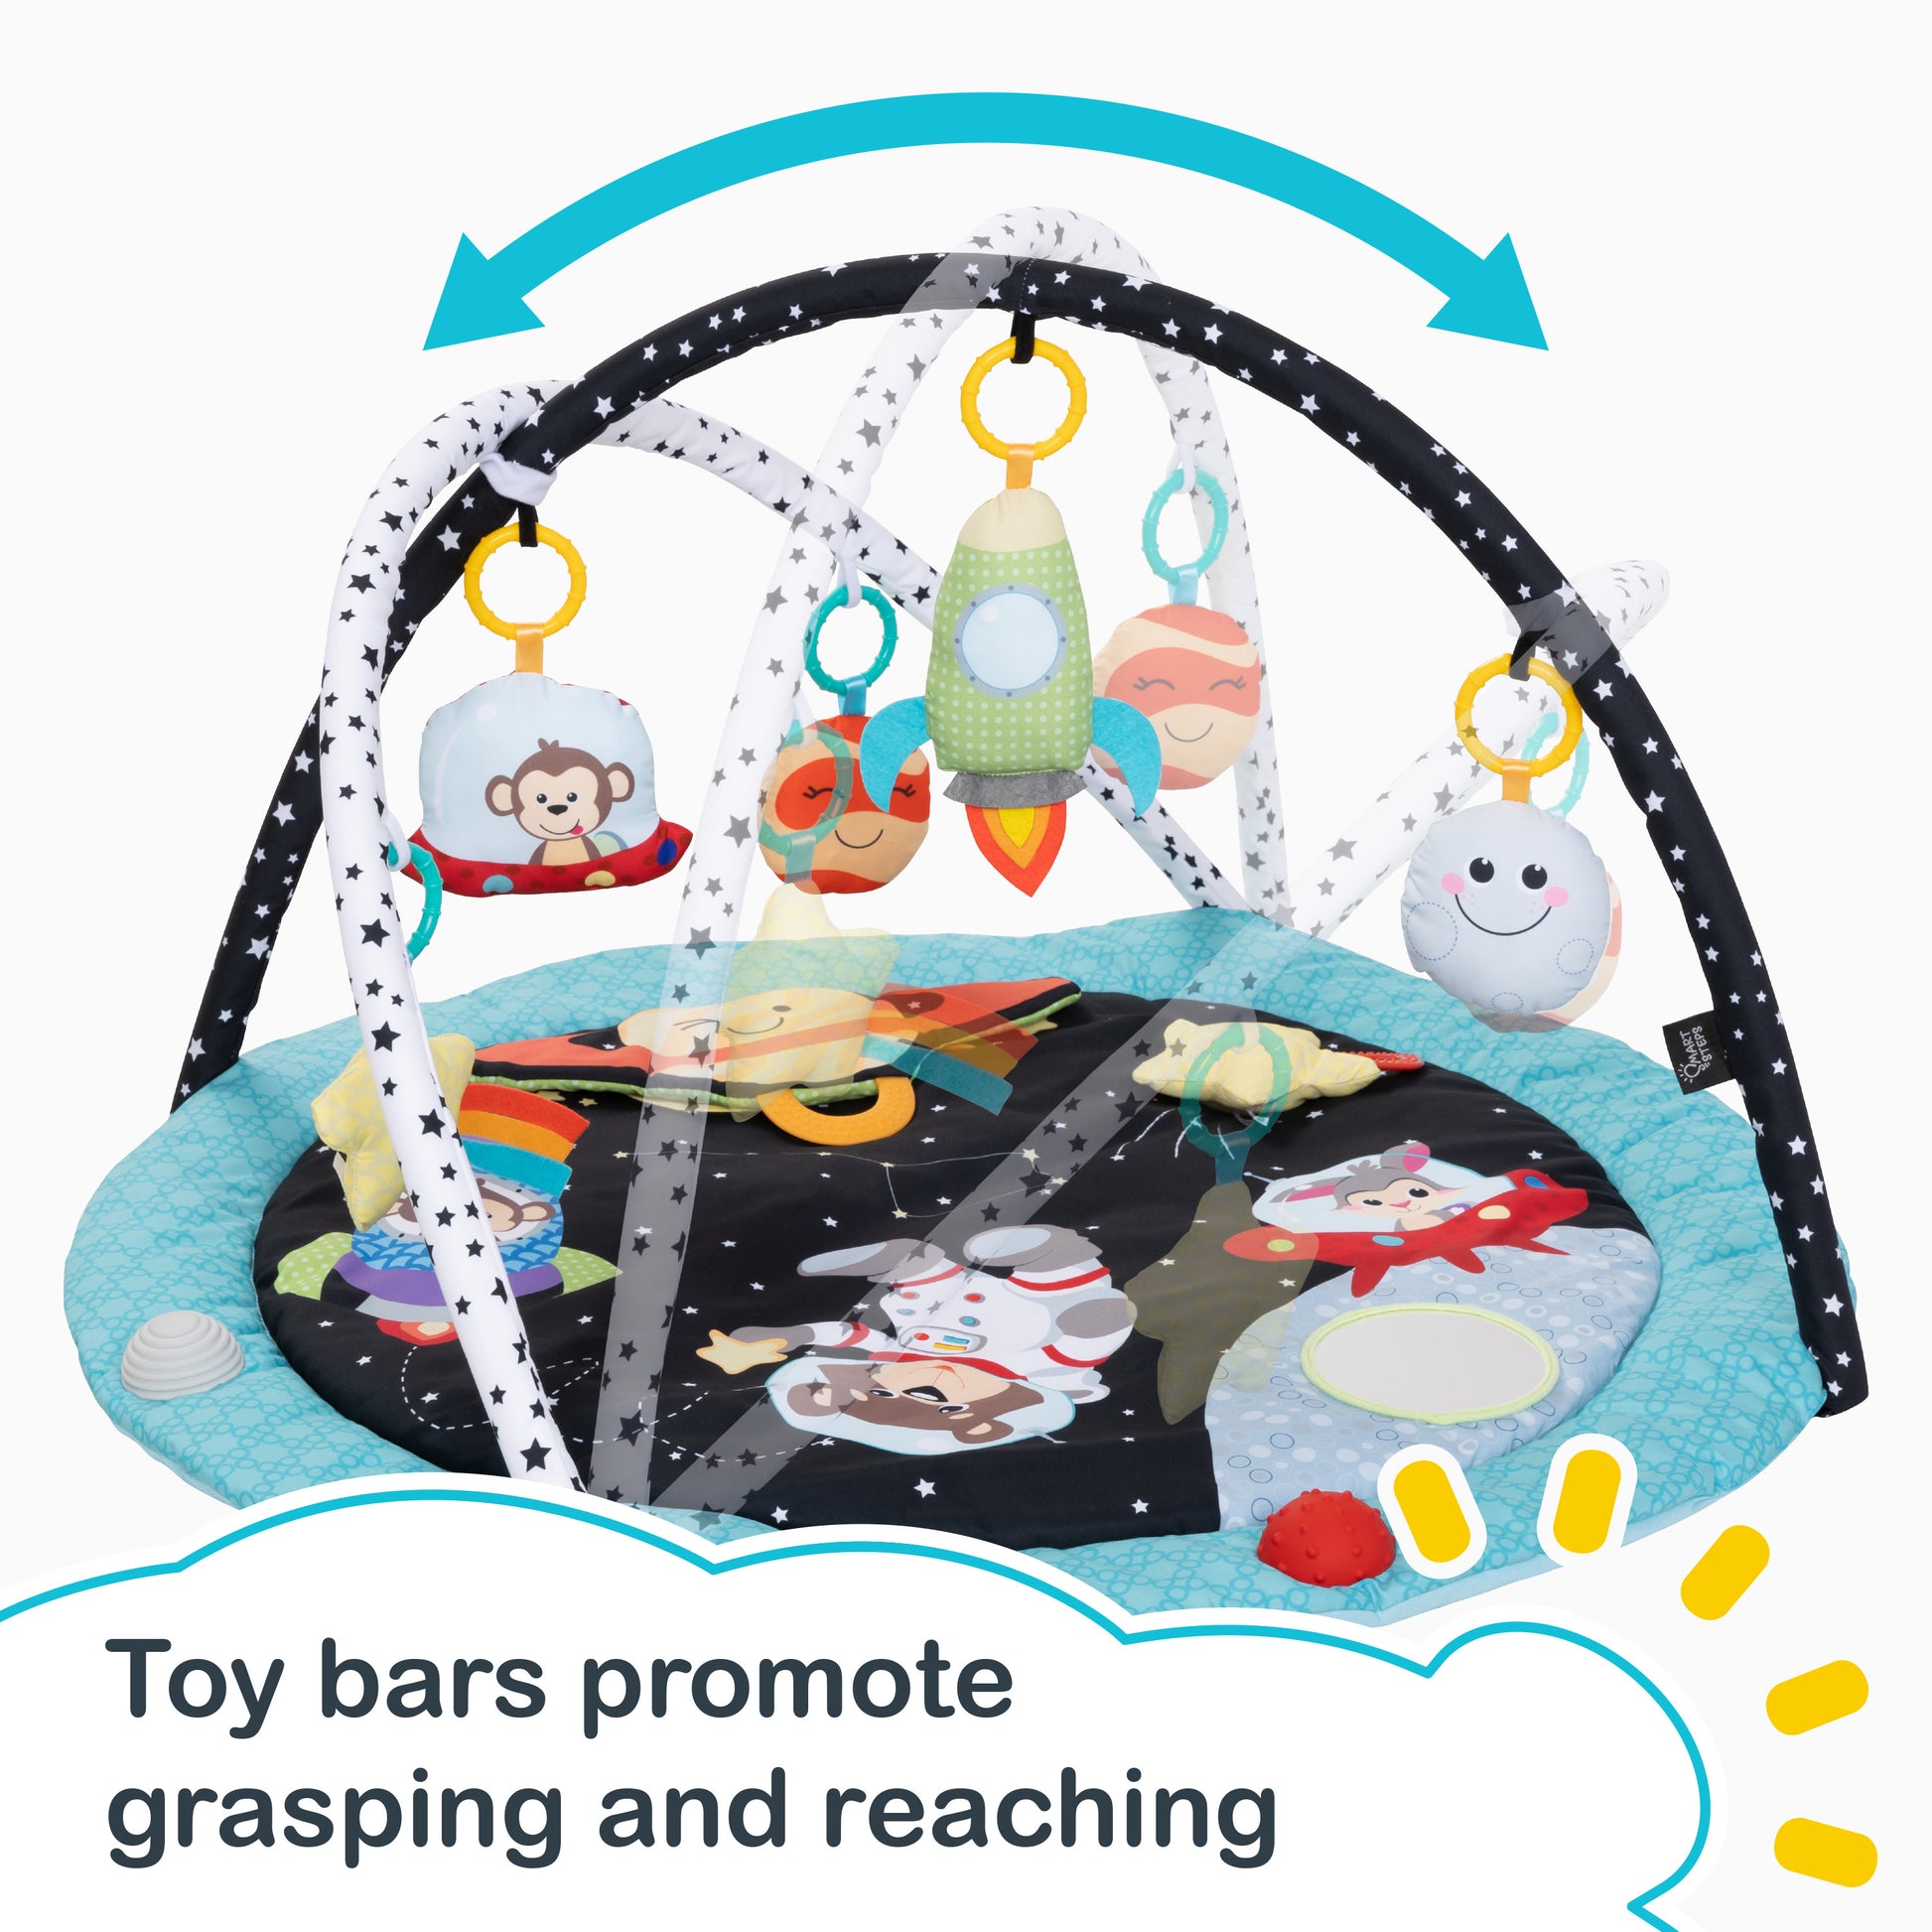 Toy bars promote grasping and reaching from the Smart Steps Baby Sensory Activity Play Mat